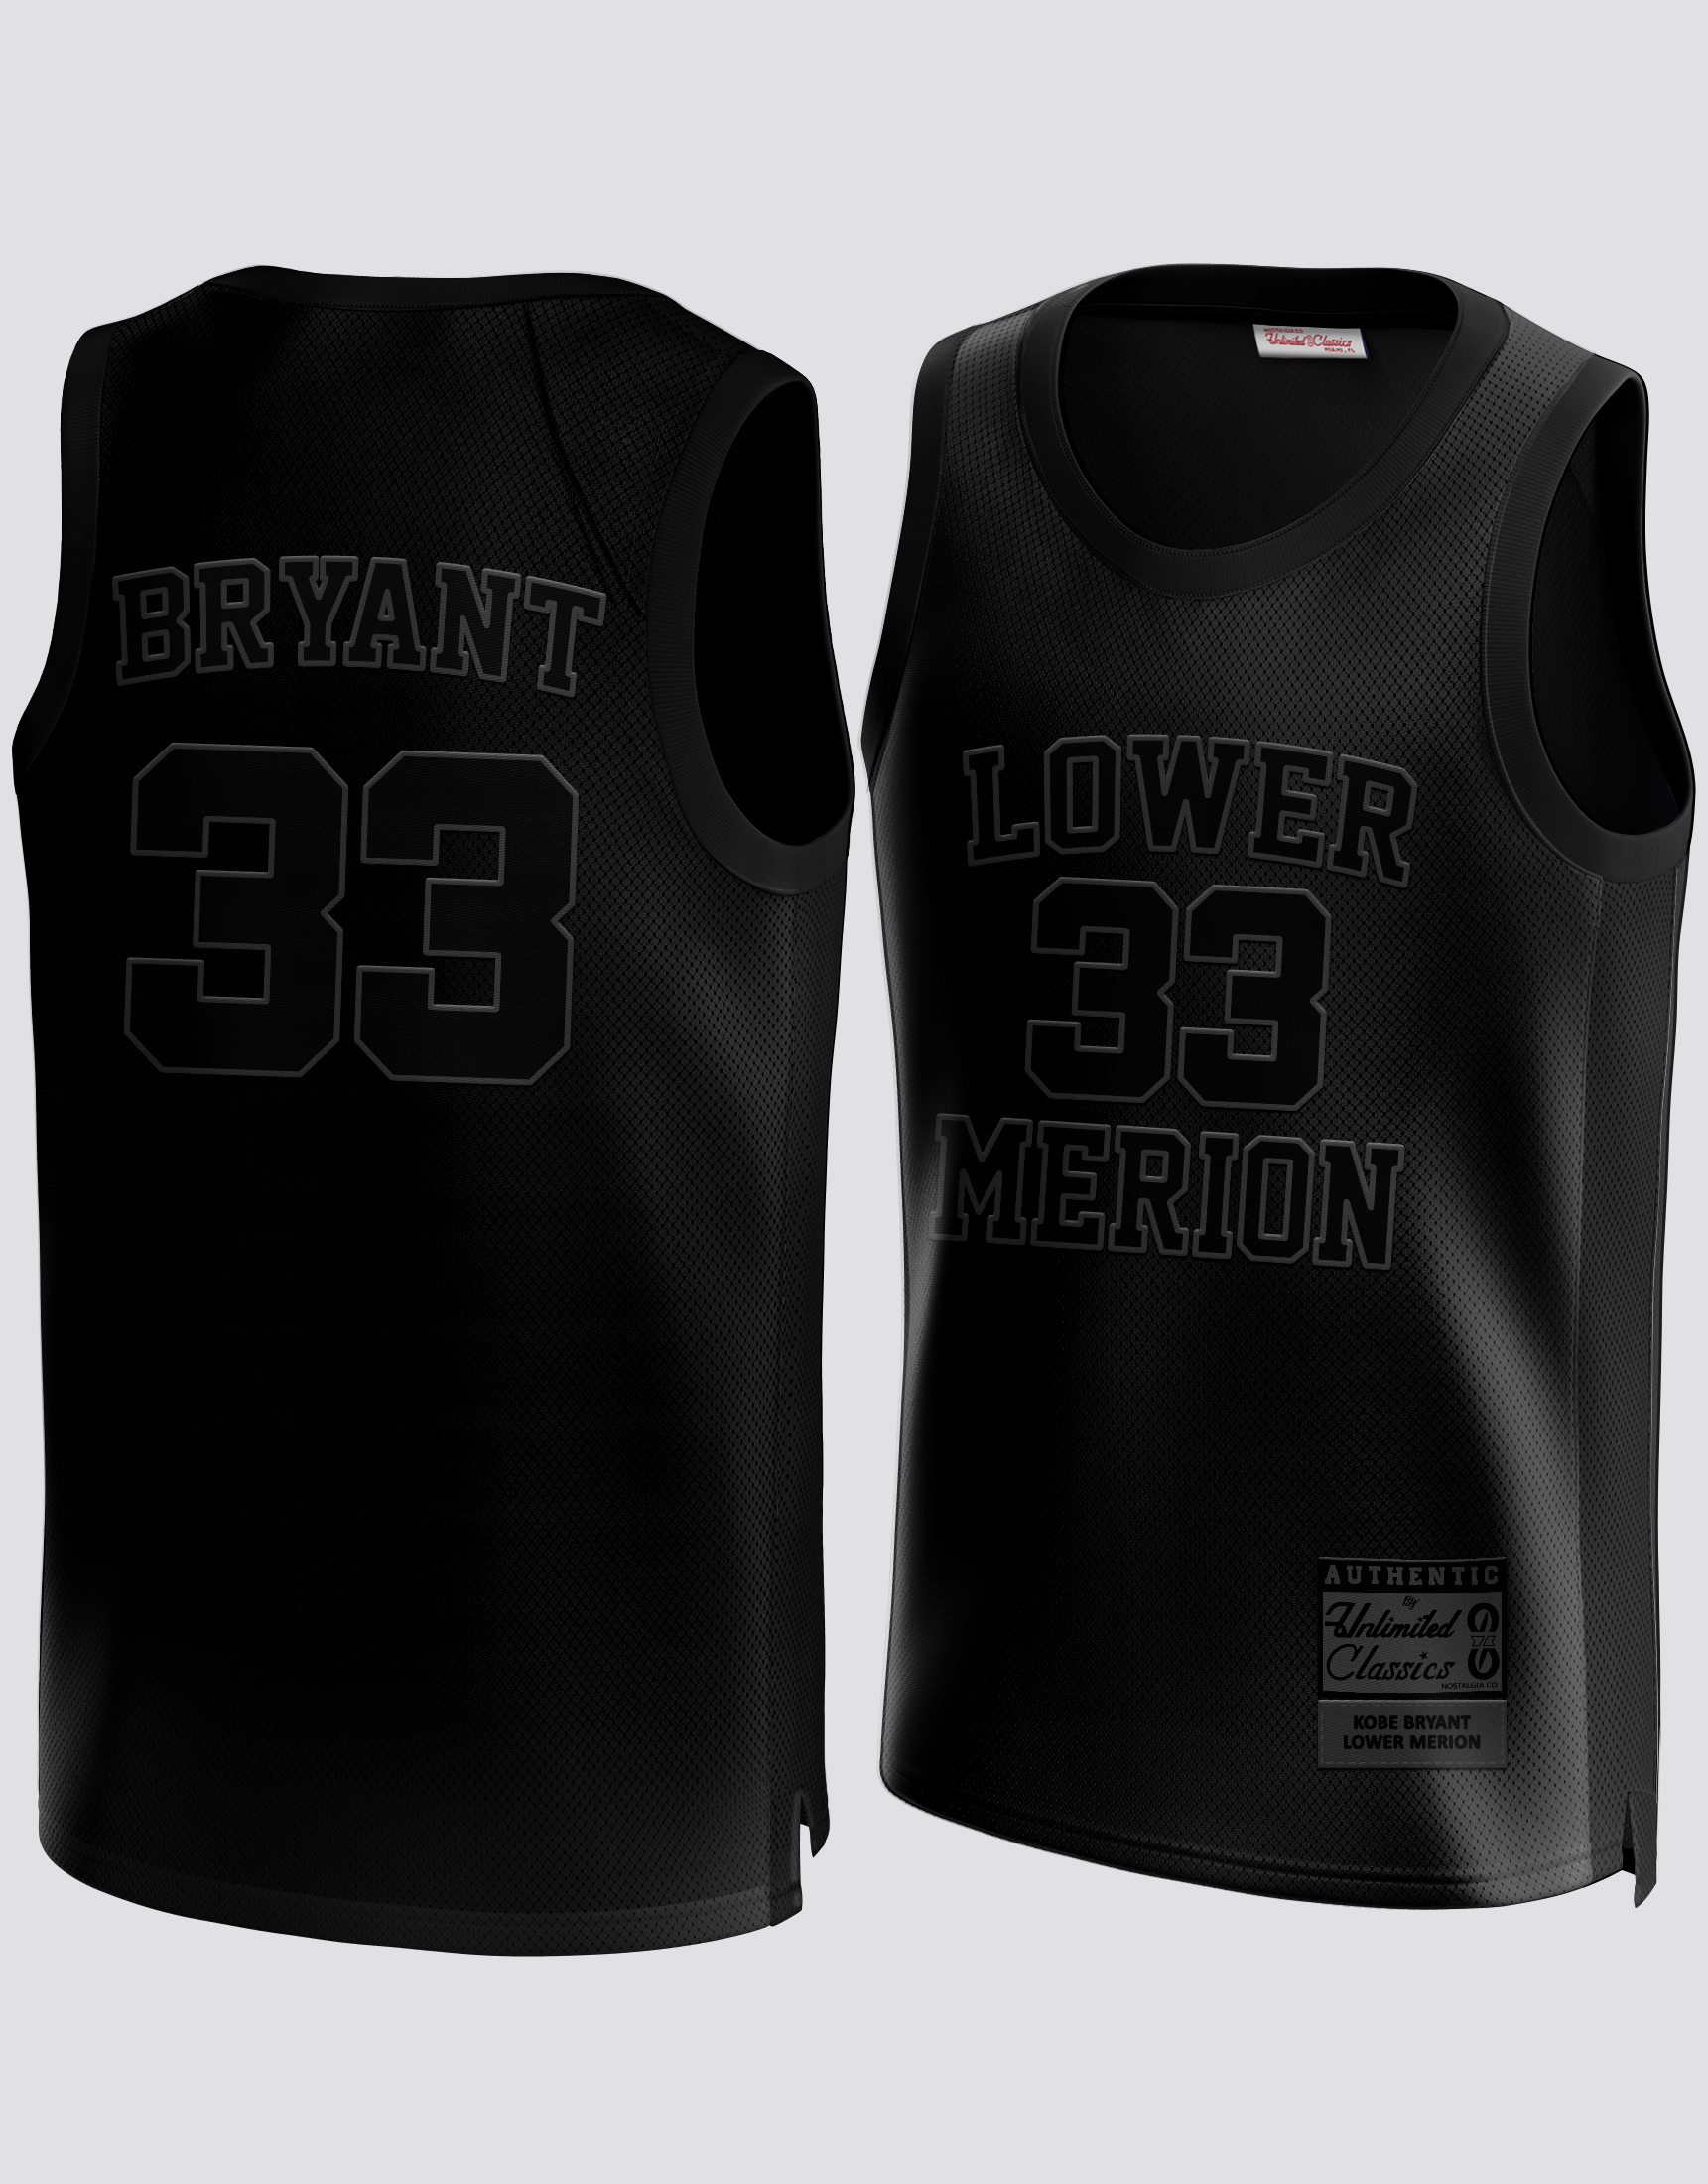 Kobe Bryant #33 Lower Merion Limited Edition Jersey - M